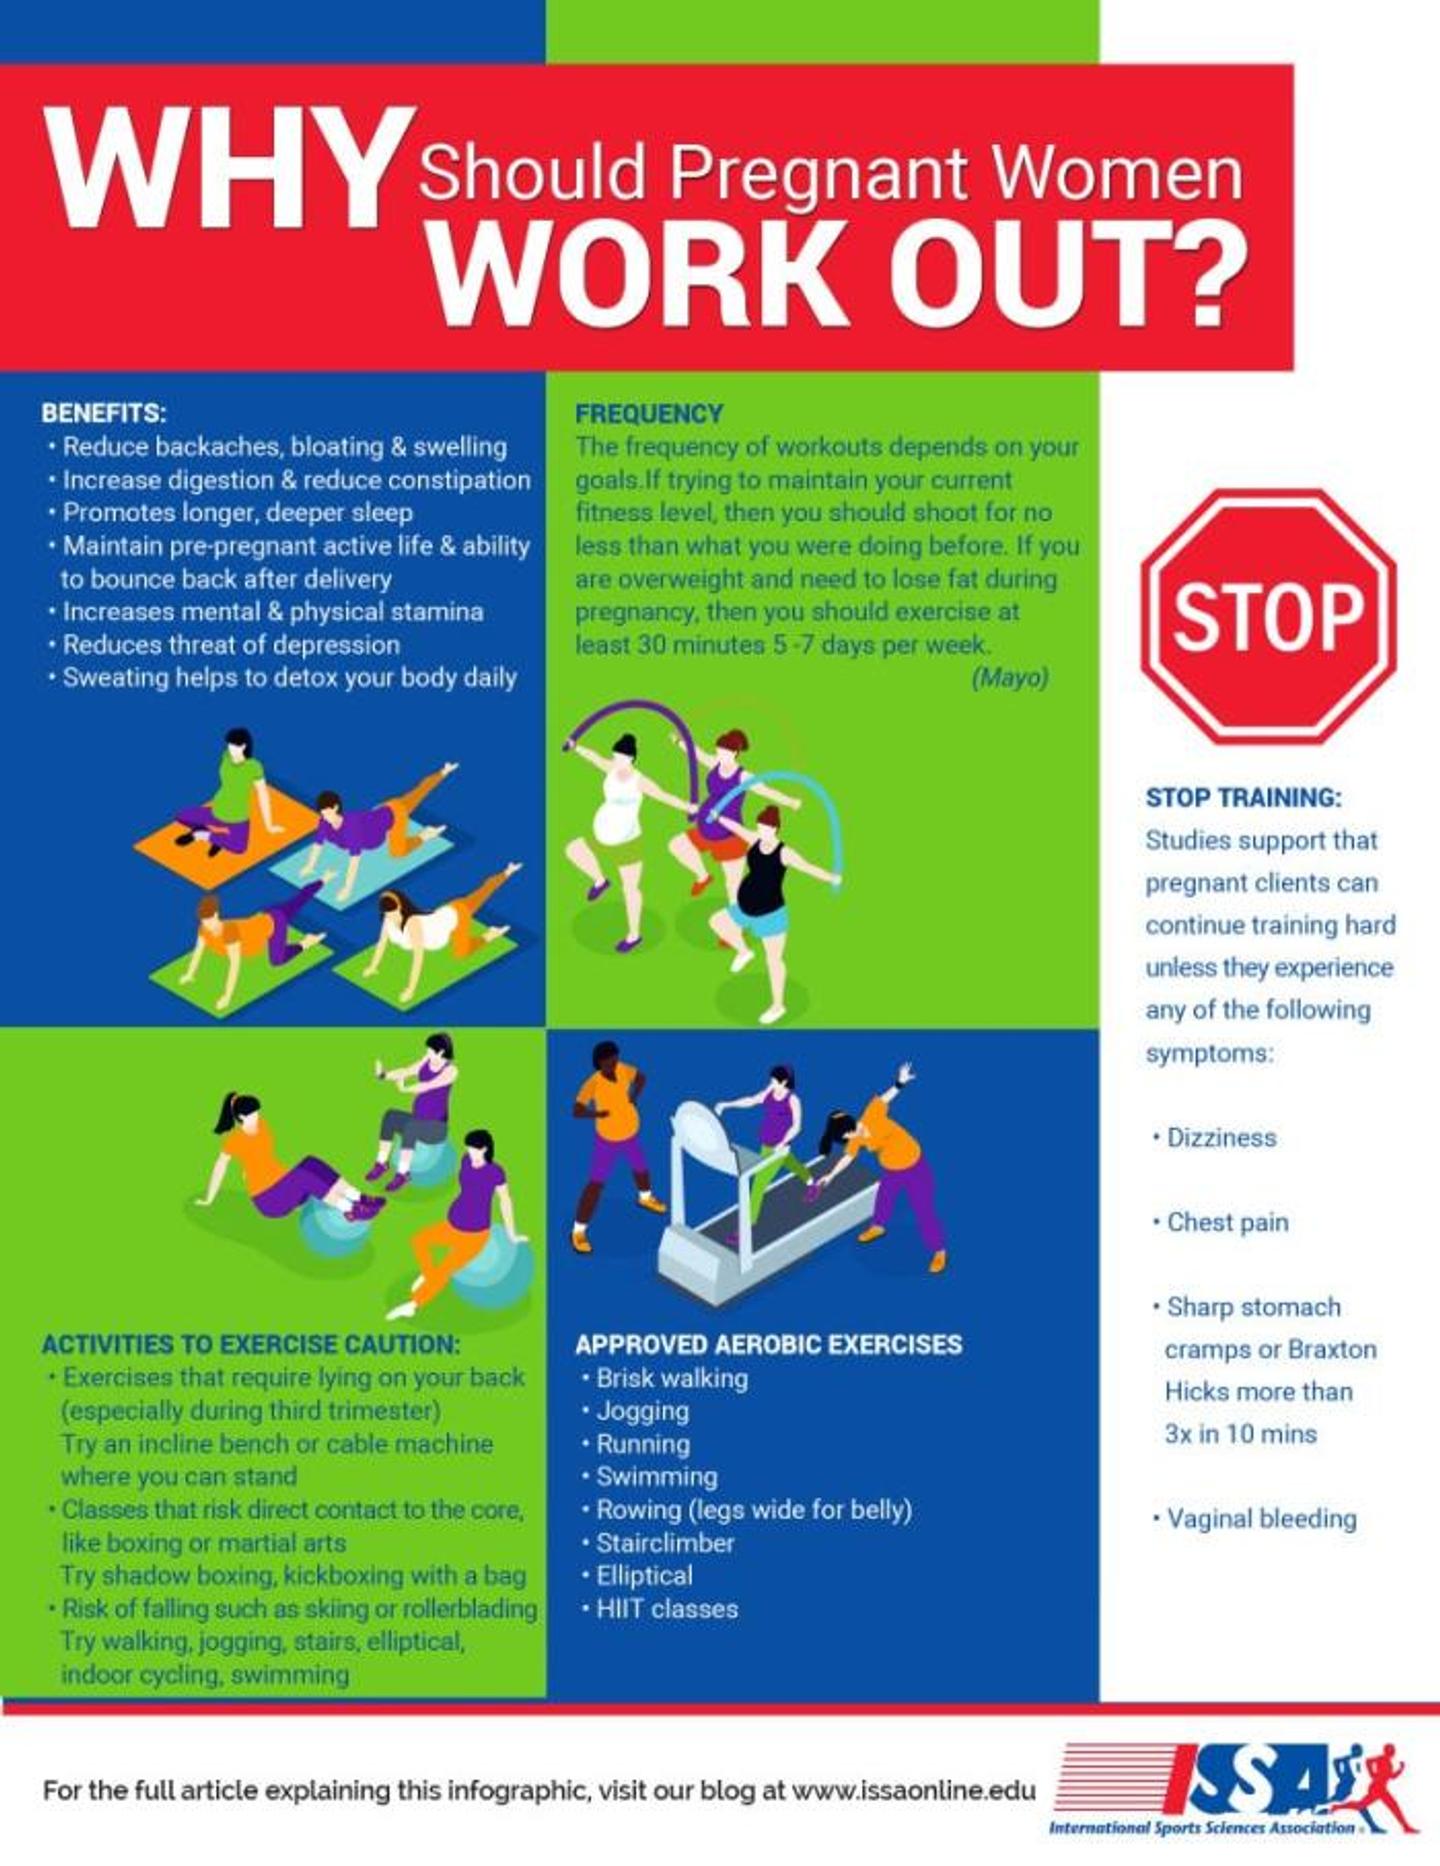 ISSA, International Sports Sciences Association, Certified Personal Trainer, ISSAonline, Pregnant workout, Should a Pregnant Woman Push Hard in Workouts?, Infographic